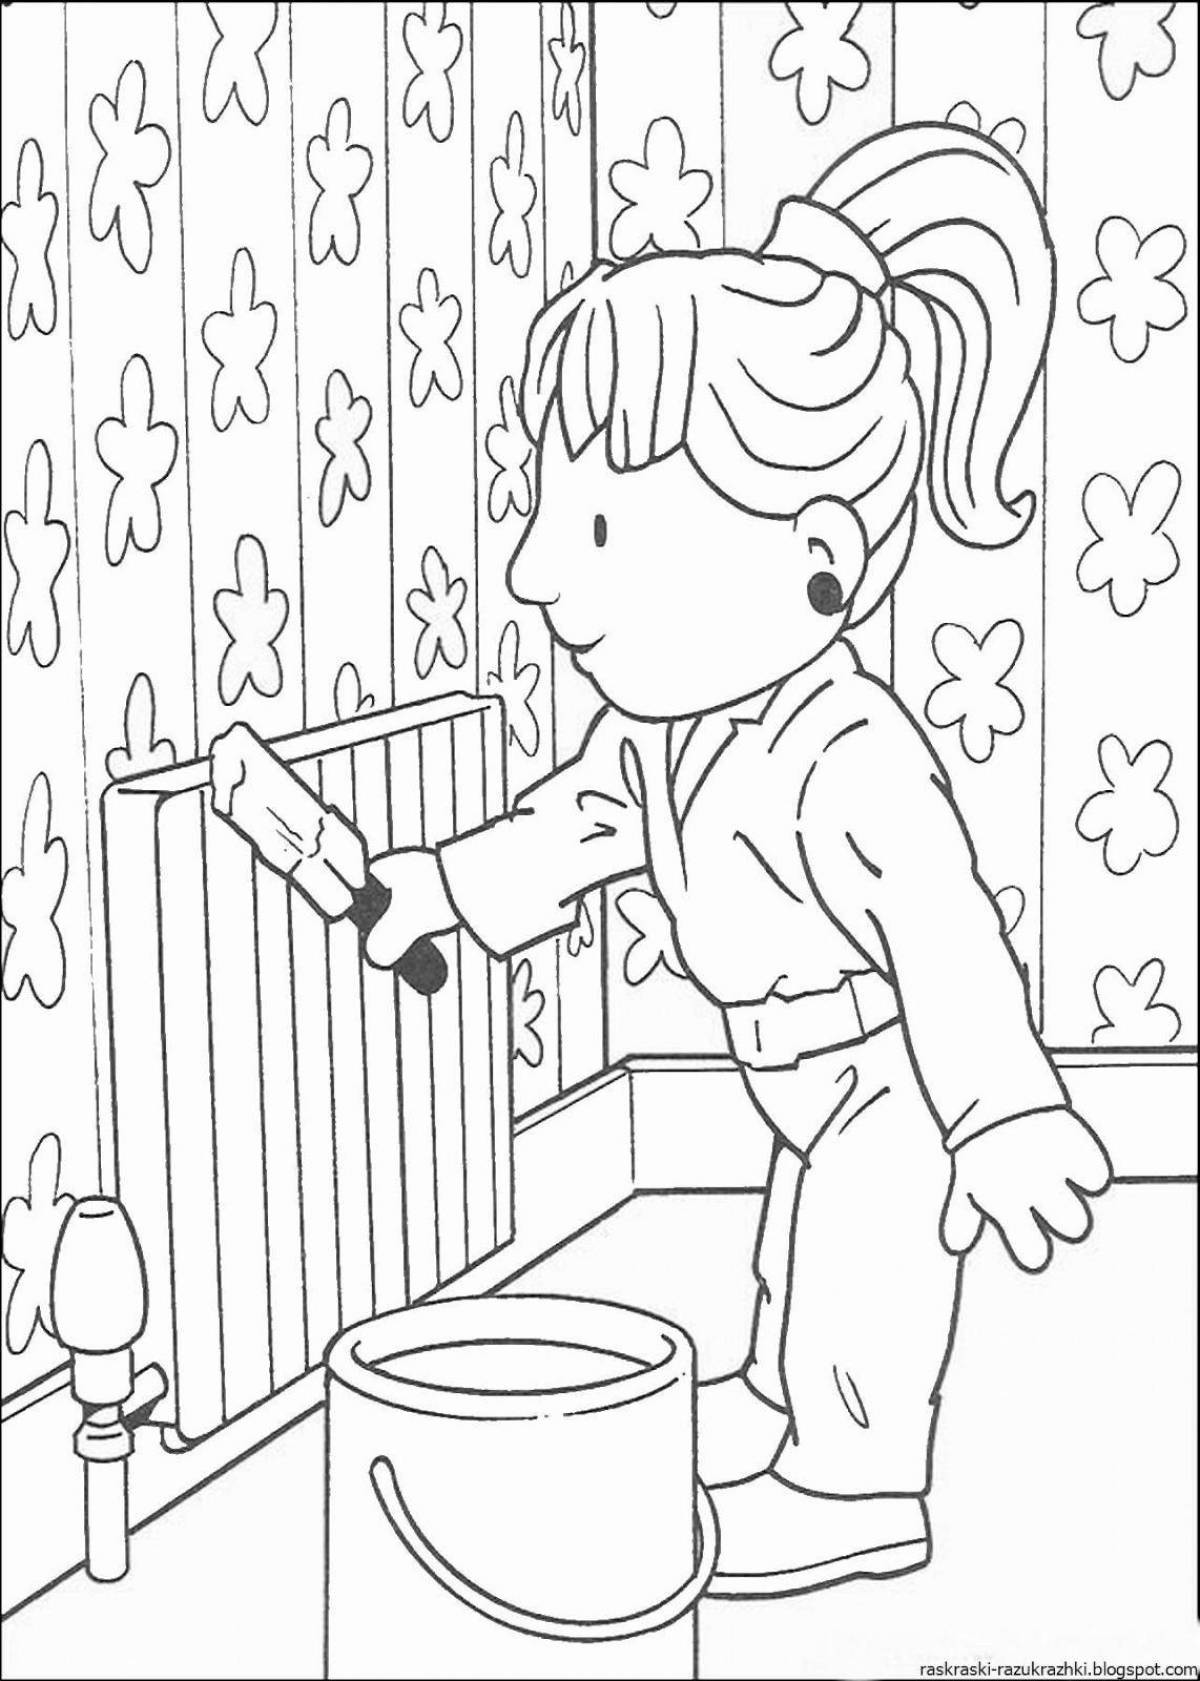 Bright house cleaning coloring book for kids